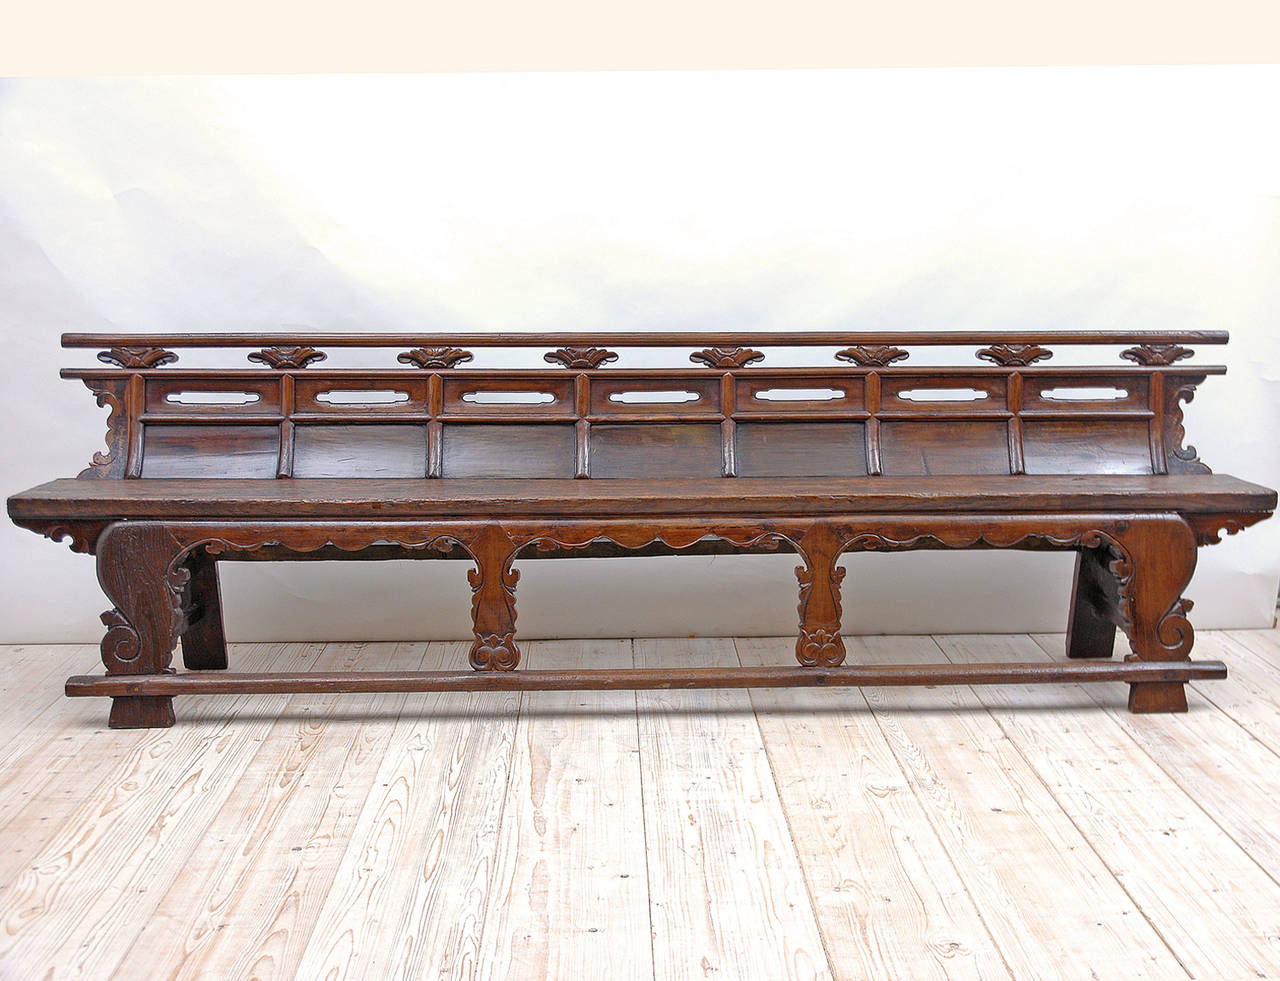 From the Shanxi province in China, an exceptionally beautiful and long bench in elm wood with paneled concave back and pierced carvings between rails and upper panels, carved apron and legs. Seat is composed of one long wood plank. Has a rich and